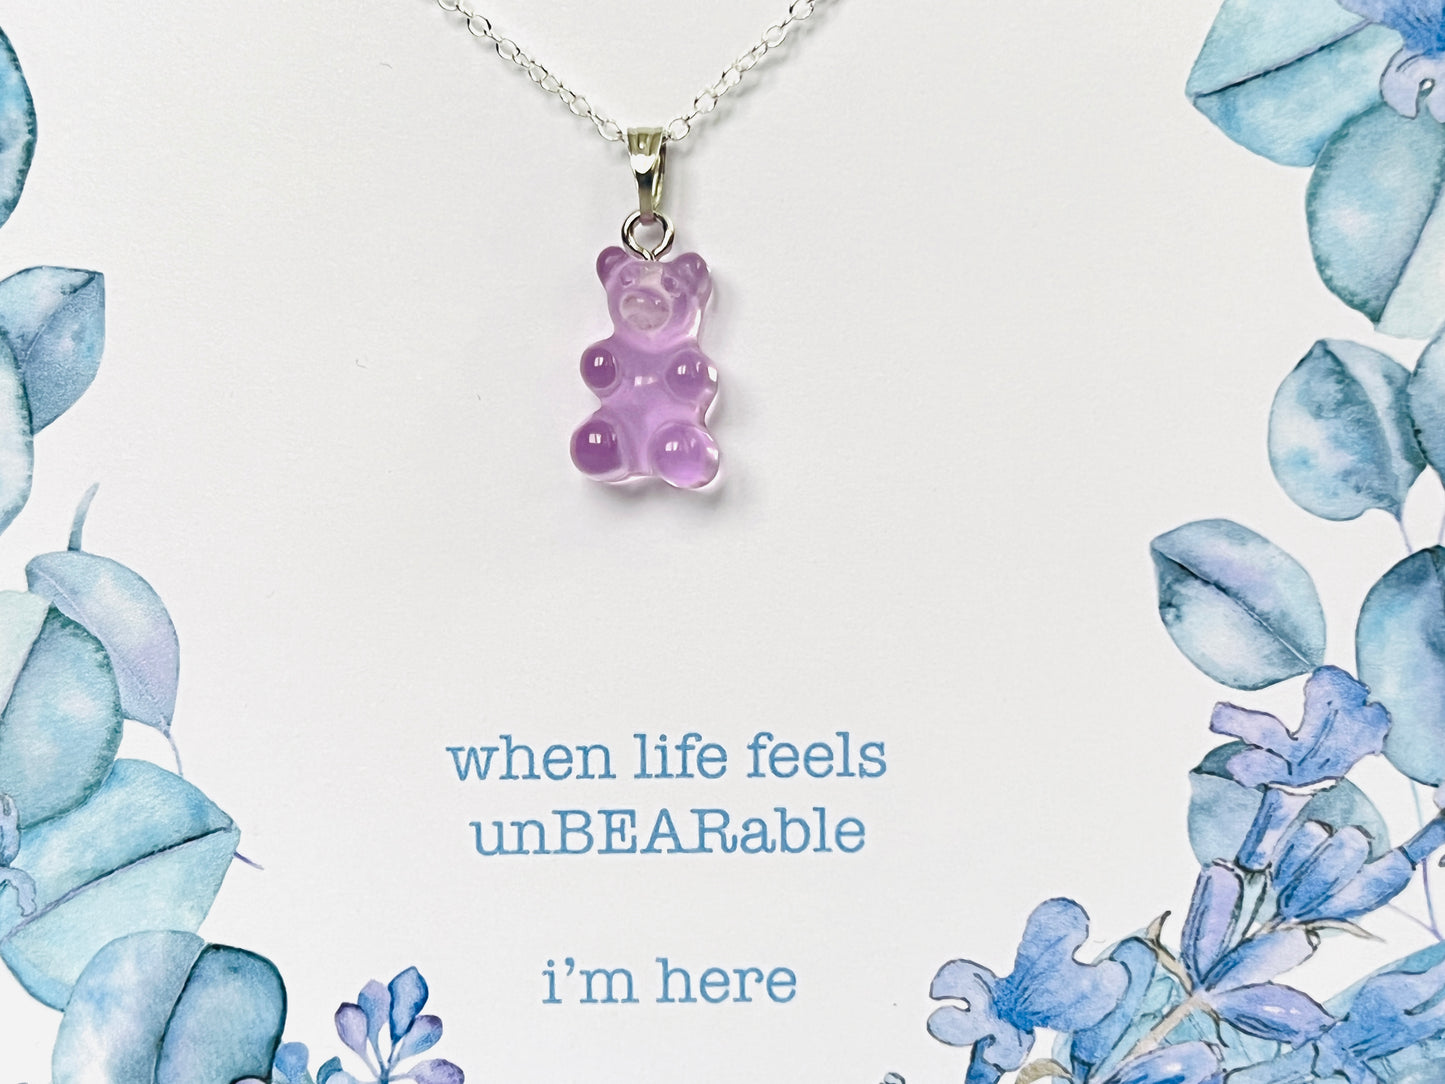 unBEARable Greeting Card with jewelry